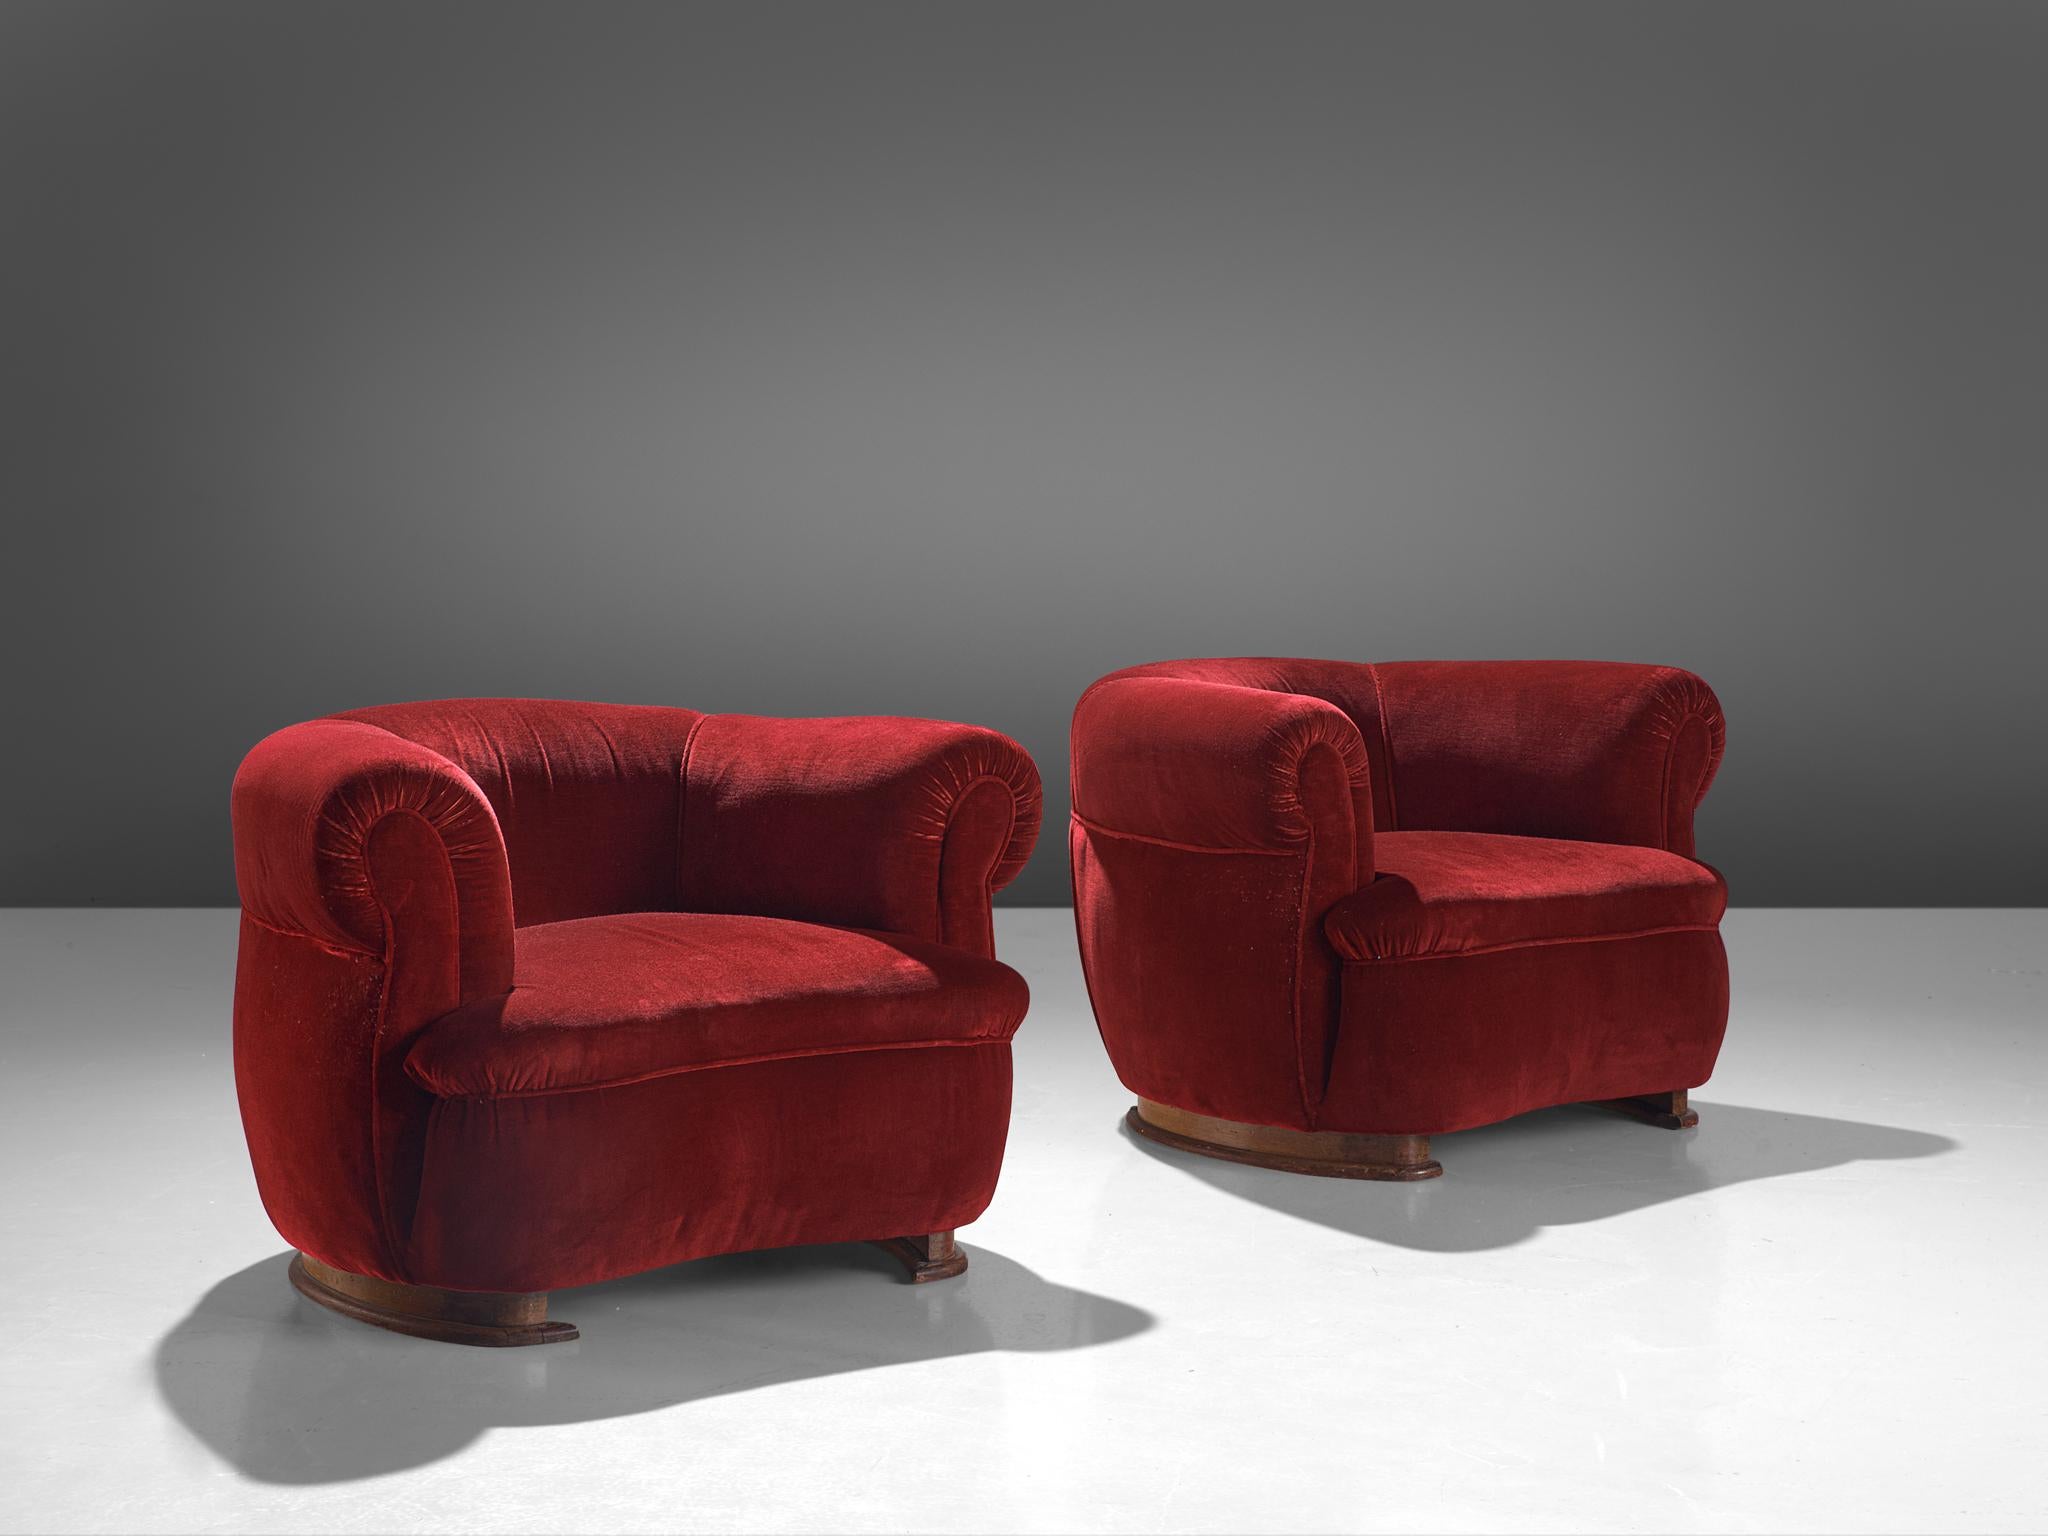 Pair of lounge chairs, oak and red velvet, France, 1940s.

Wide and comfortable chair in red fabric upholstery. Truly extraordinary theatrical lounge chairs that feature a very rounded seat and curved armrests. The seat is thick and widens